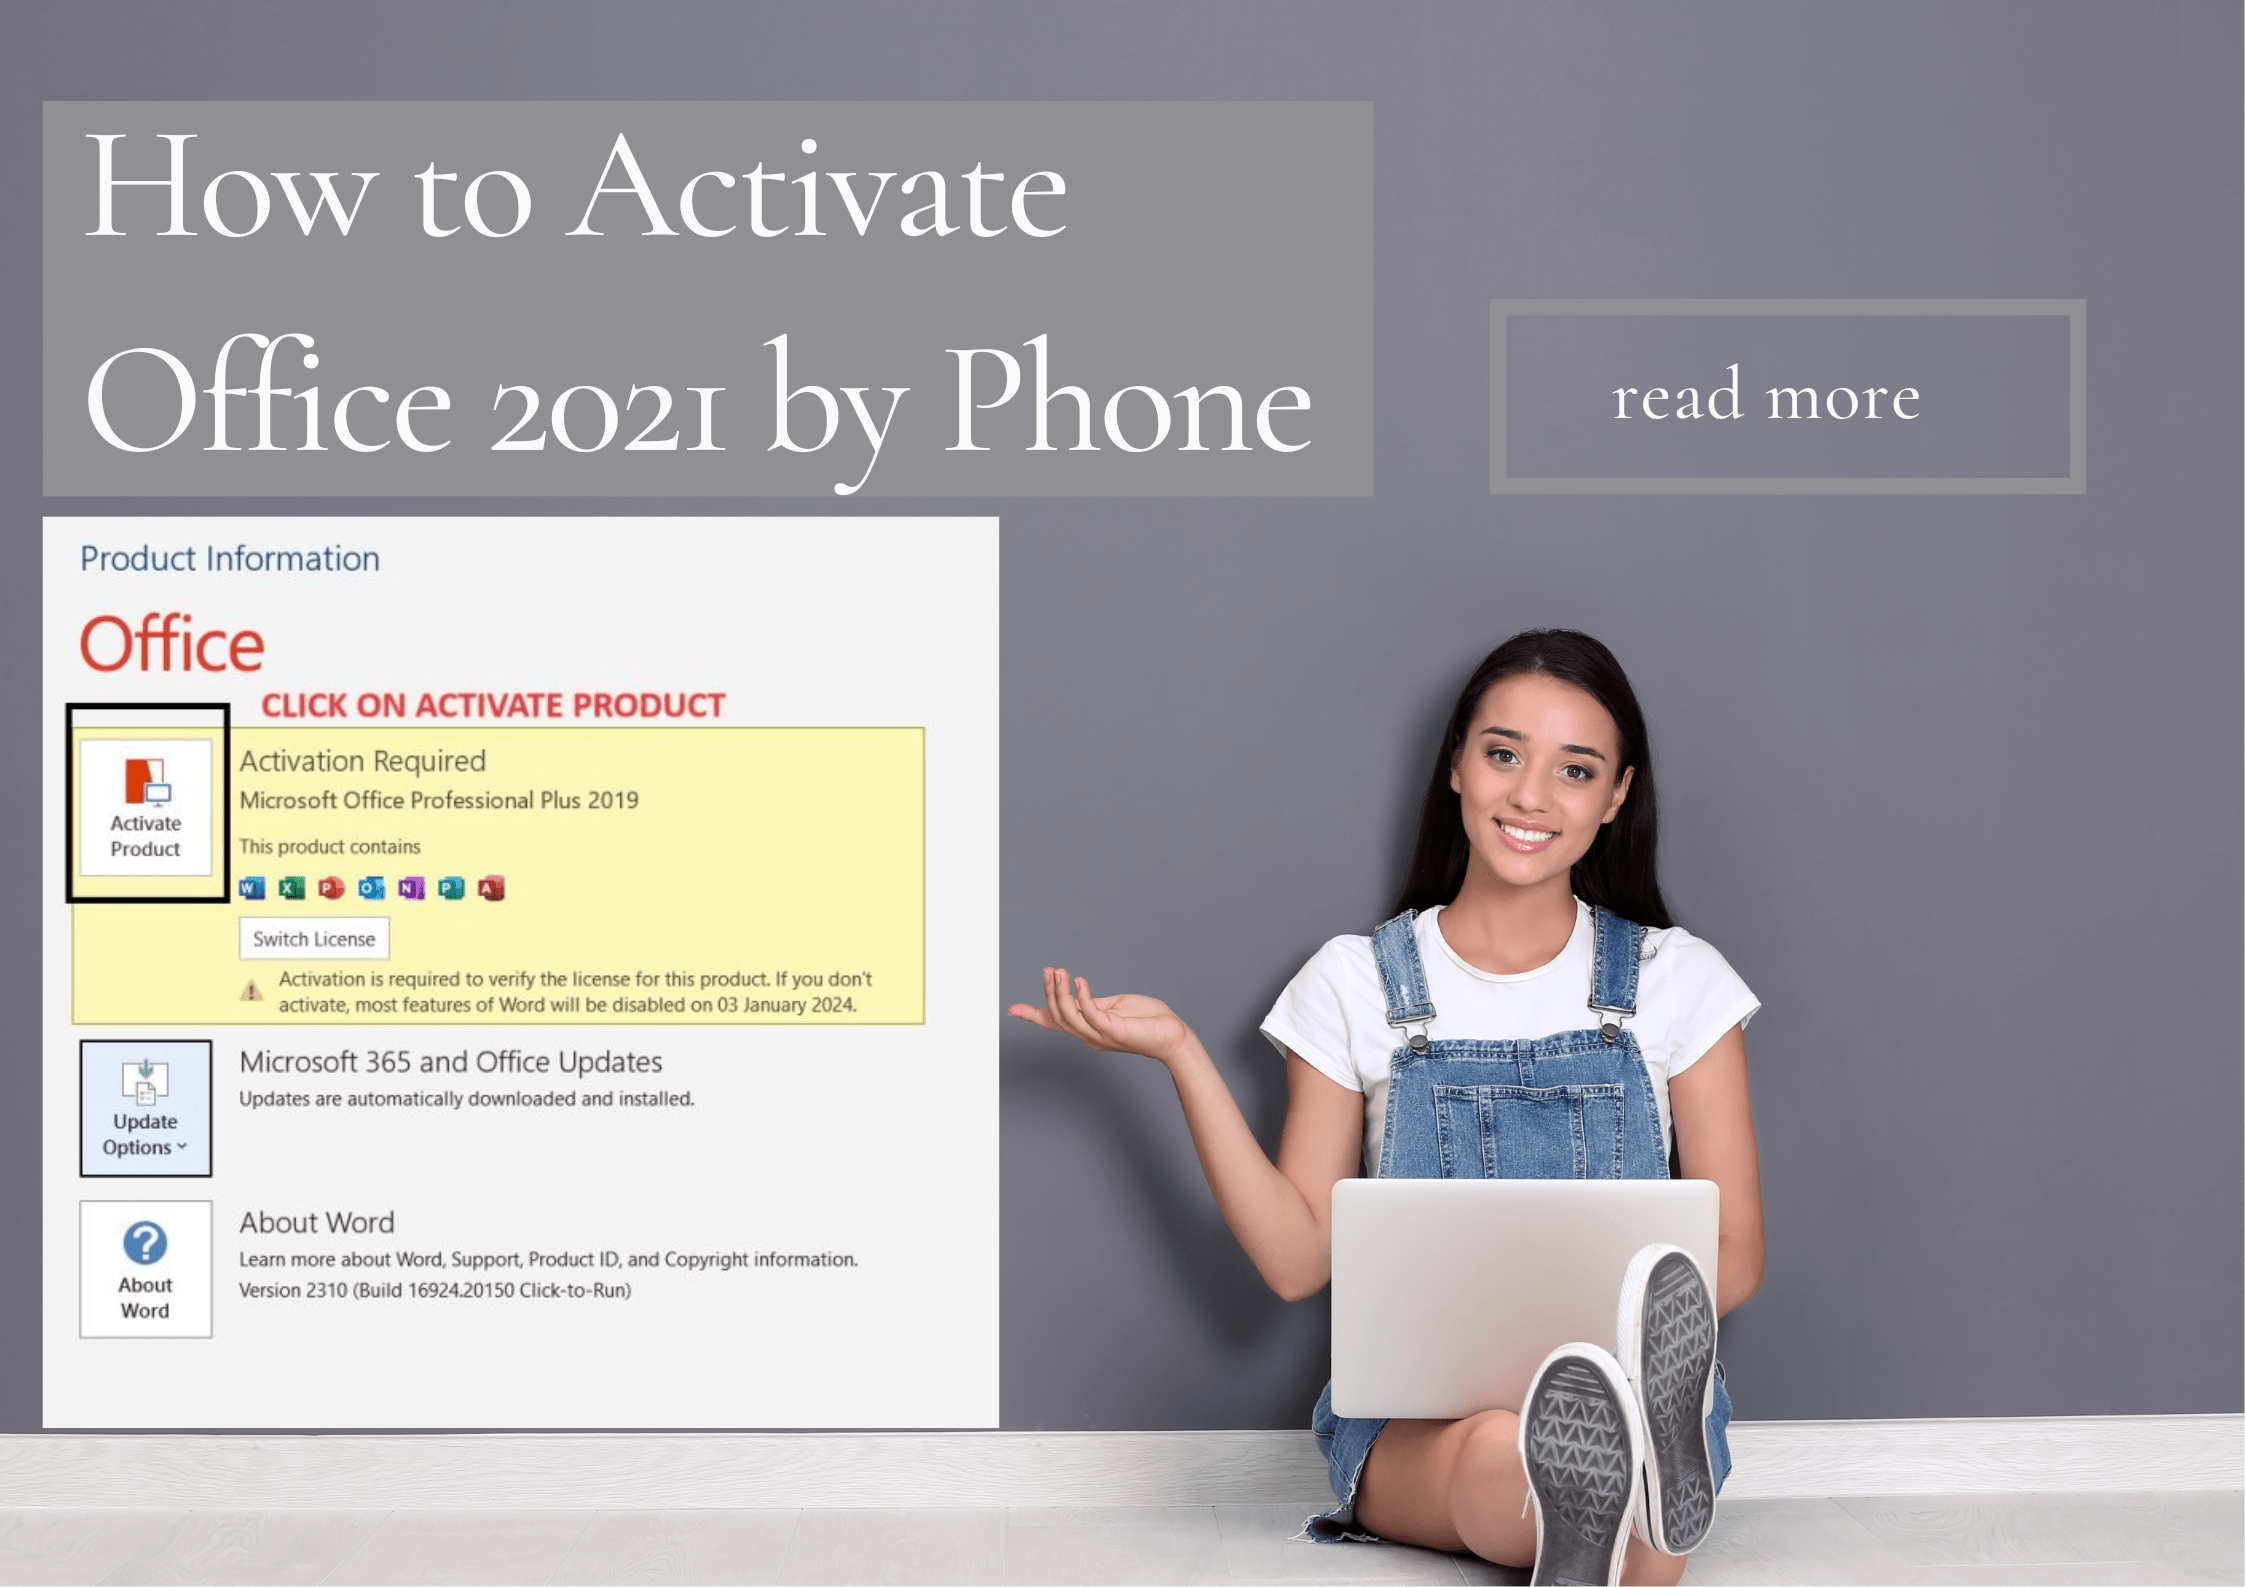 How to Activate Office 2021 by Phone